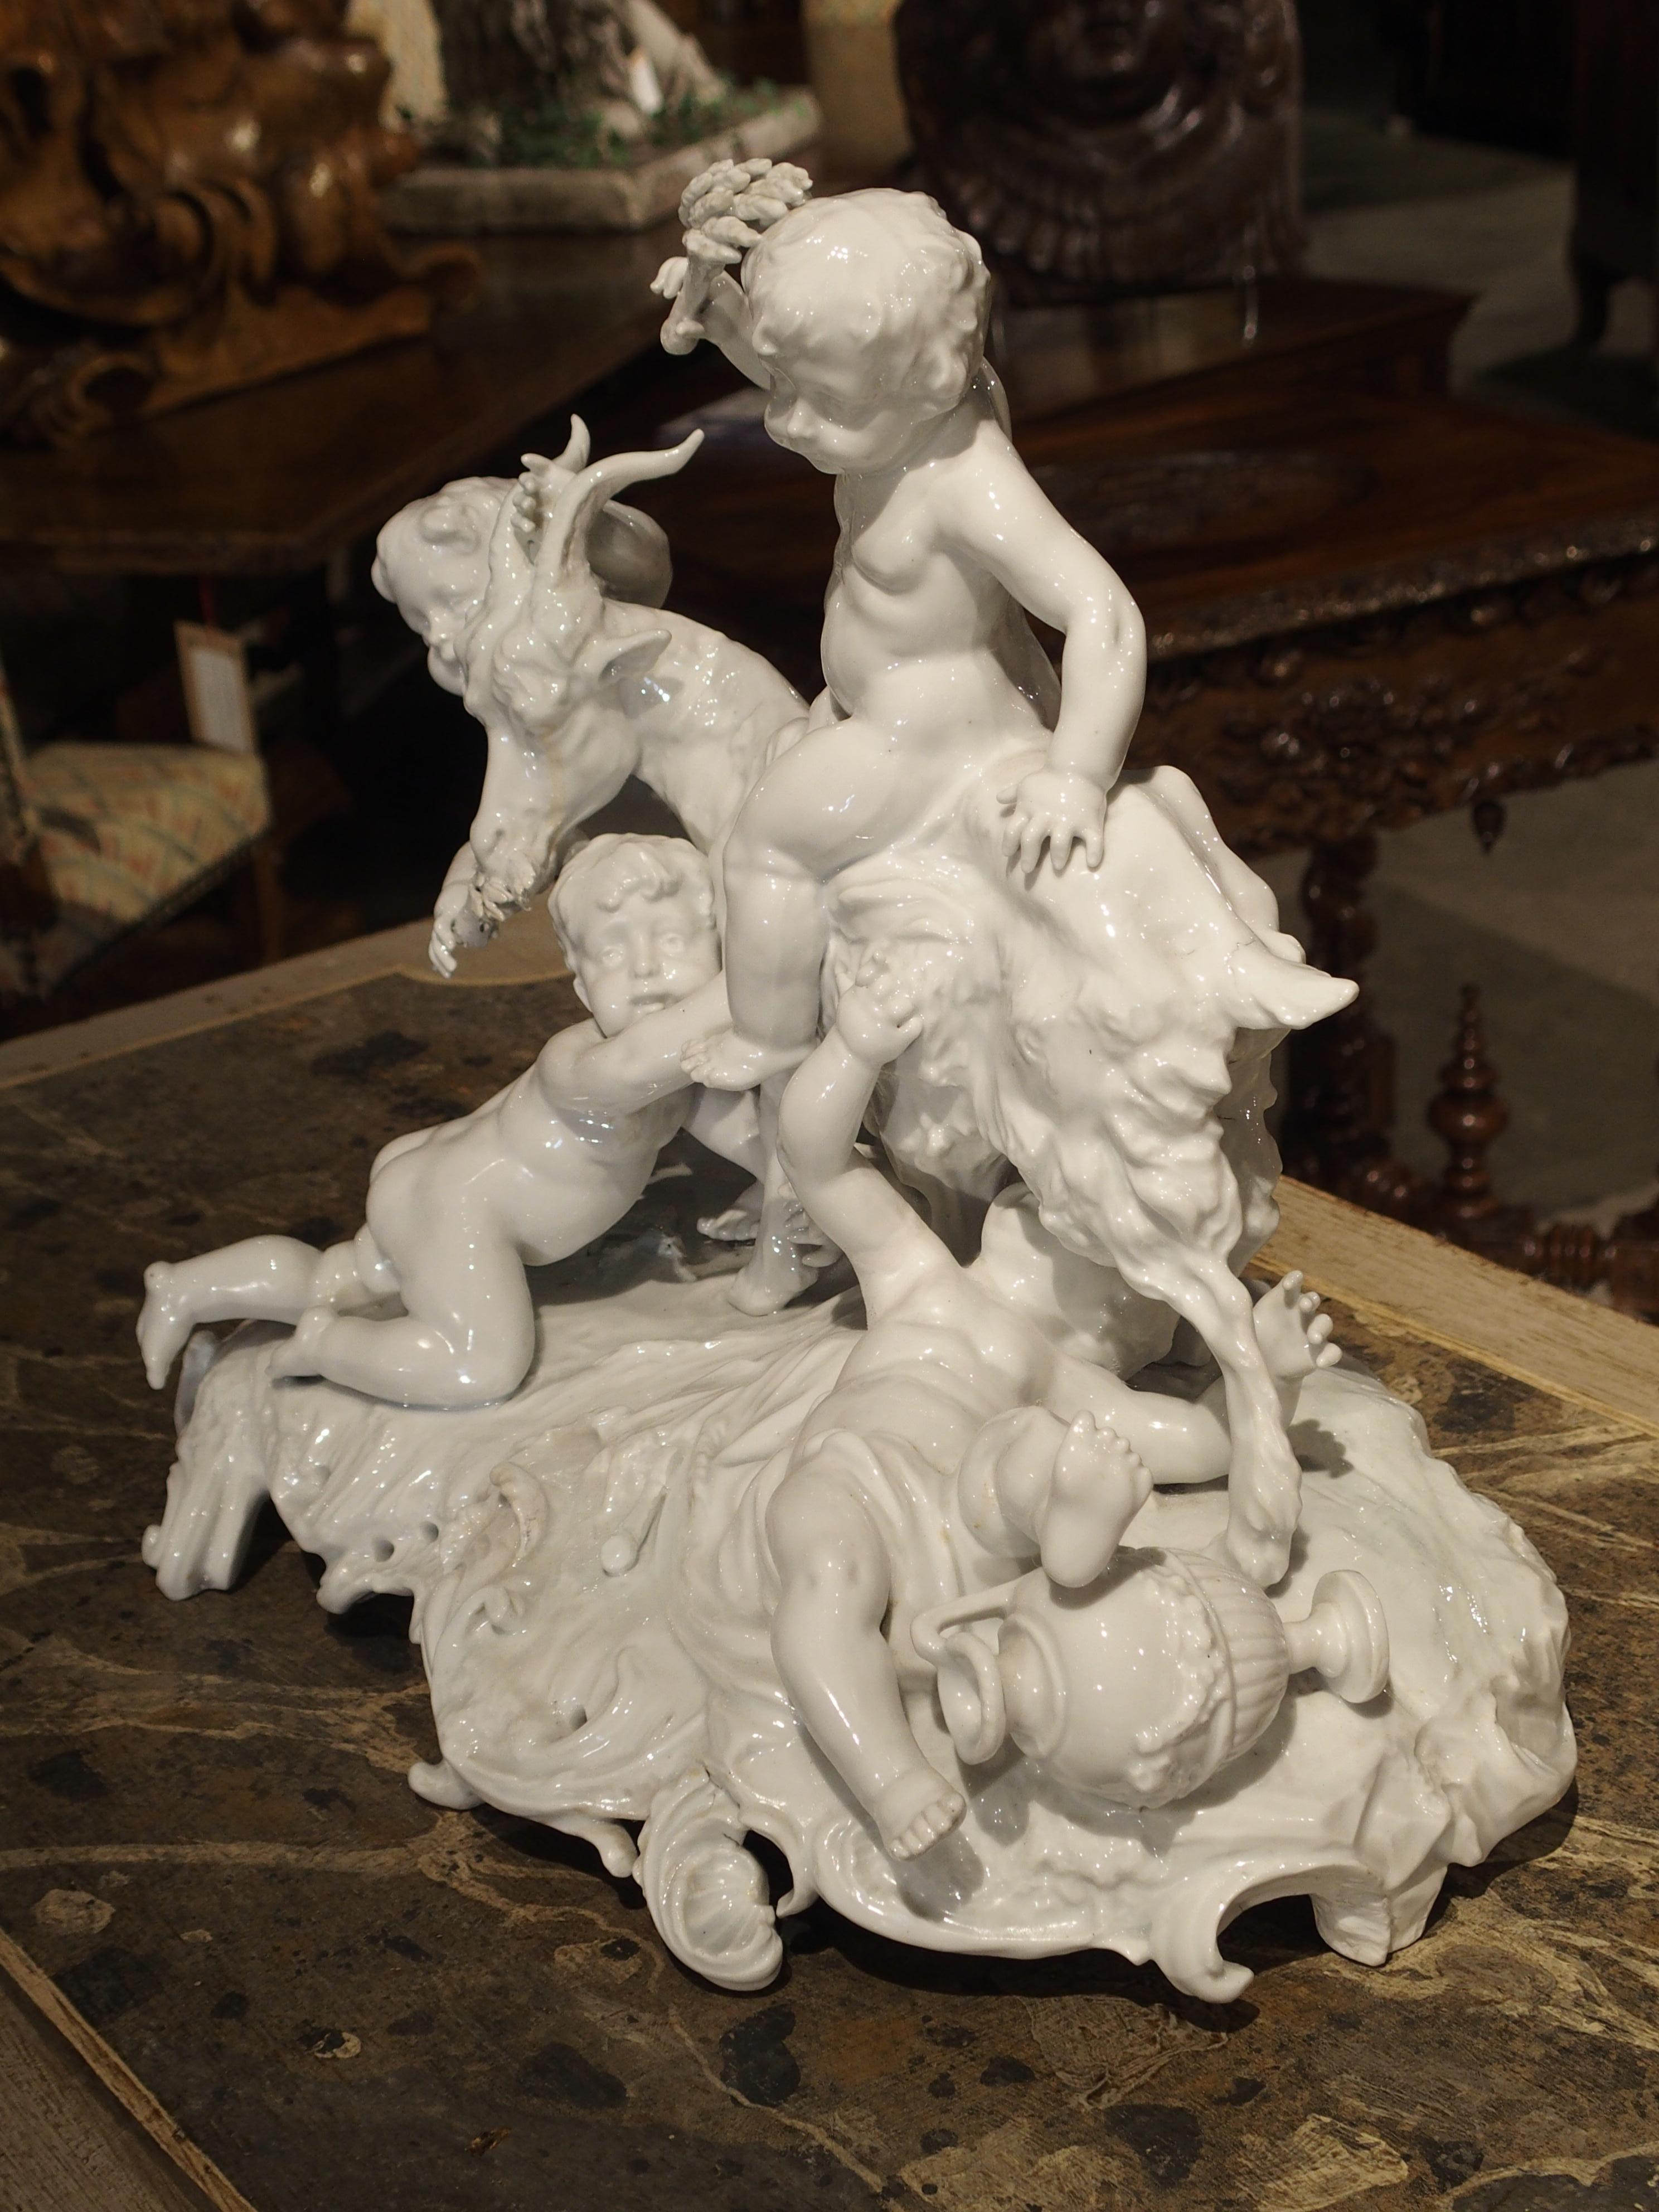 This bright Capodimonte porcelain group of four putti and a goat symbolizes abundance and the spirit of life. Capodimonte was originally an 18th century Italian porcelain company that made some of the finest figural pieces. Production has continued